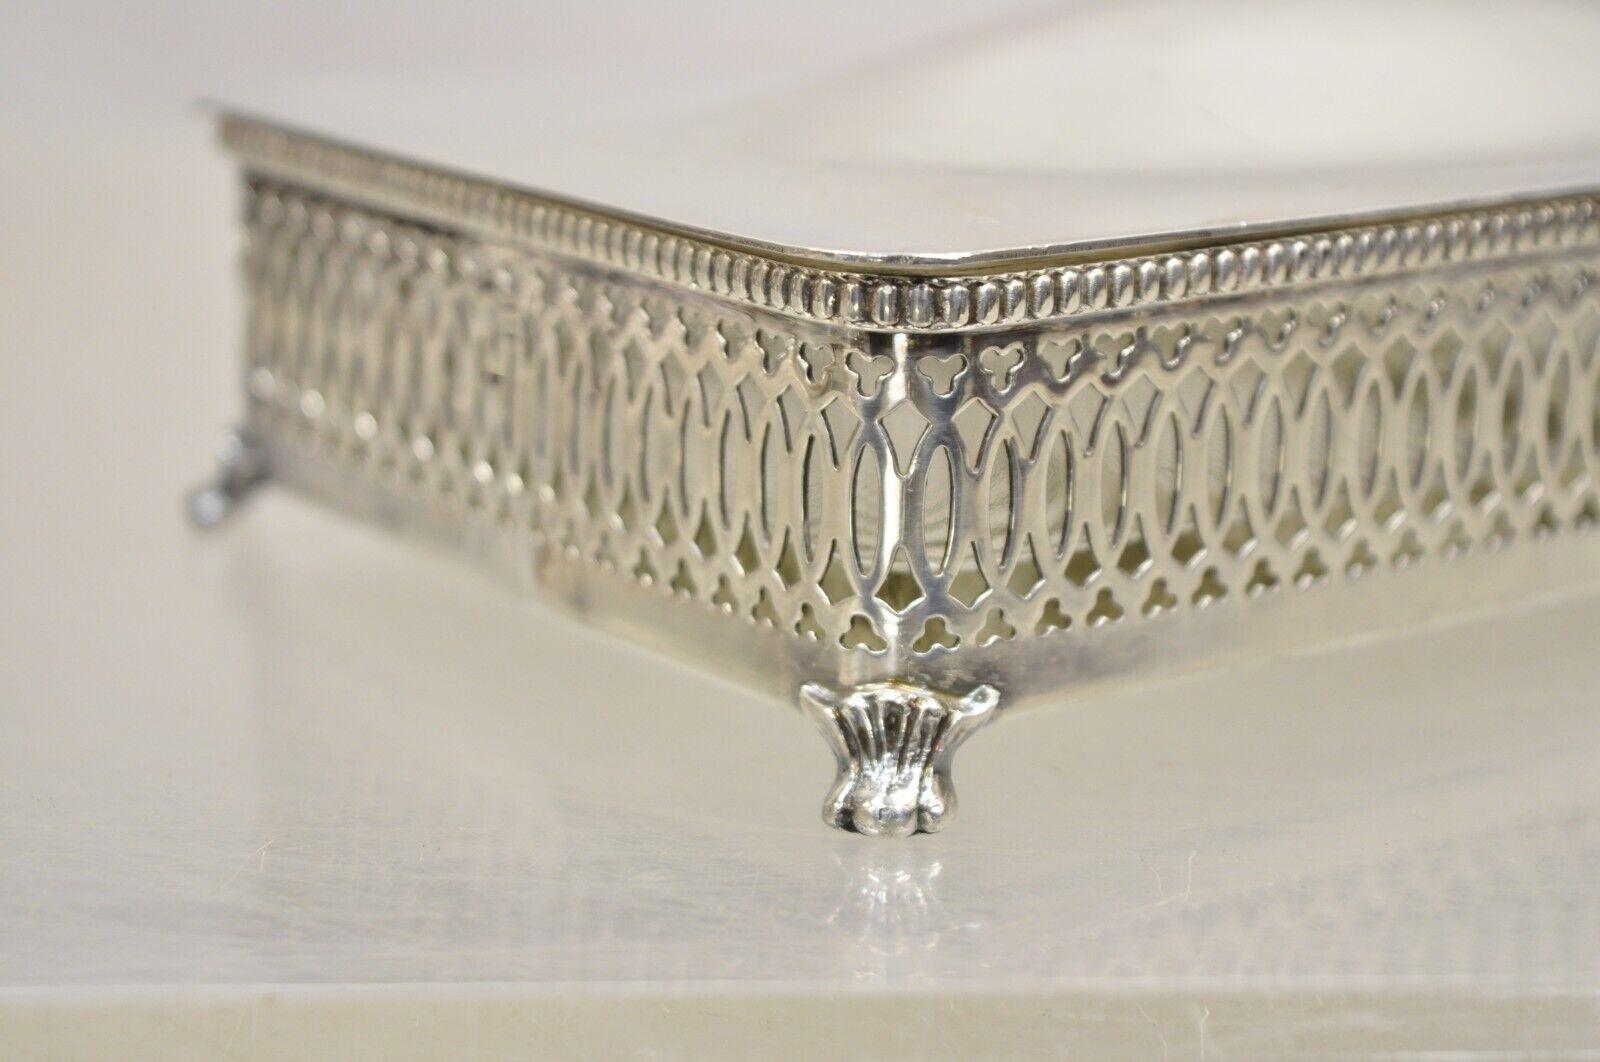 Vintage Crescent Pierce Fretwork Silver Plated Hinged Box Sectioned Glass Liner en vente 6